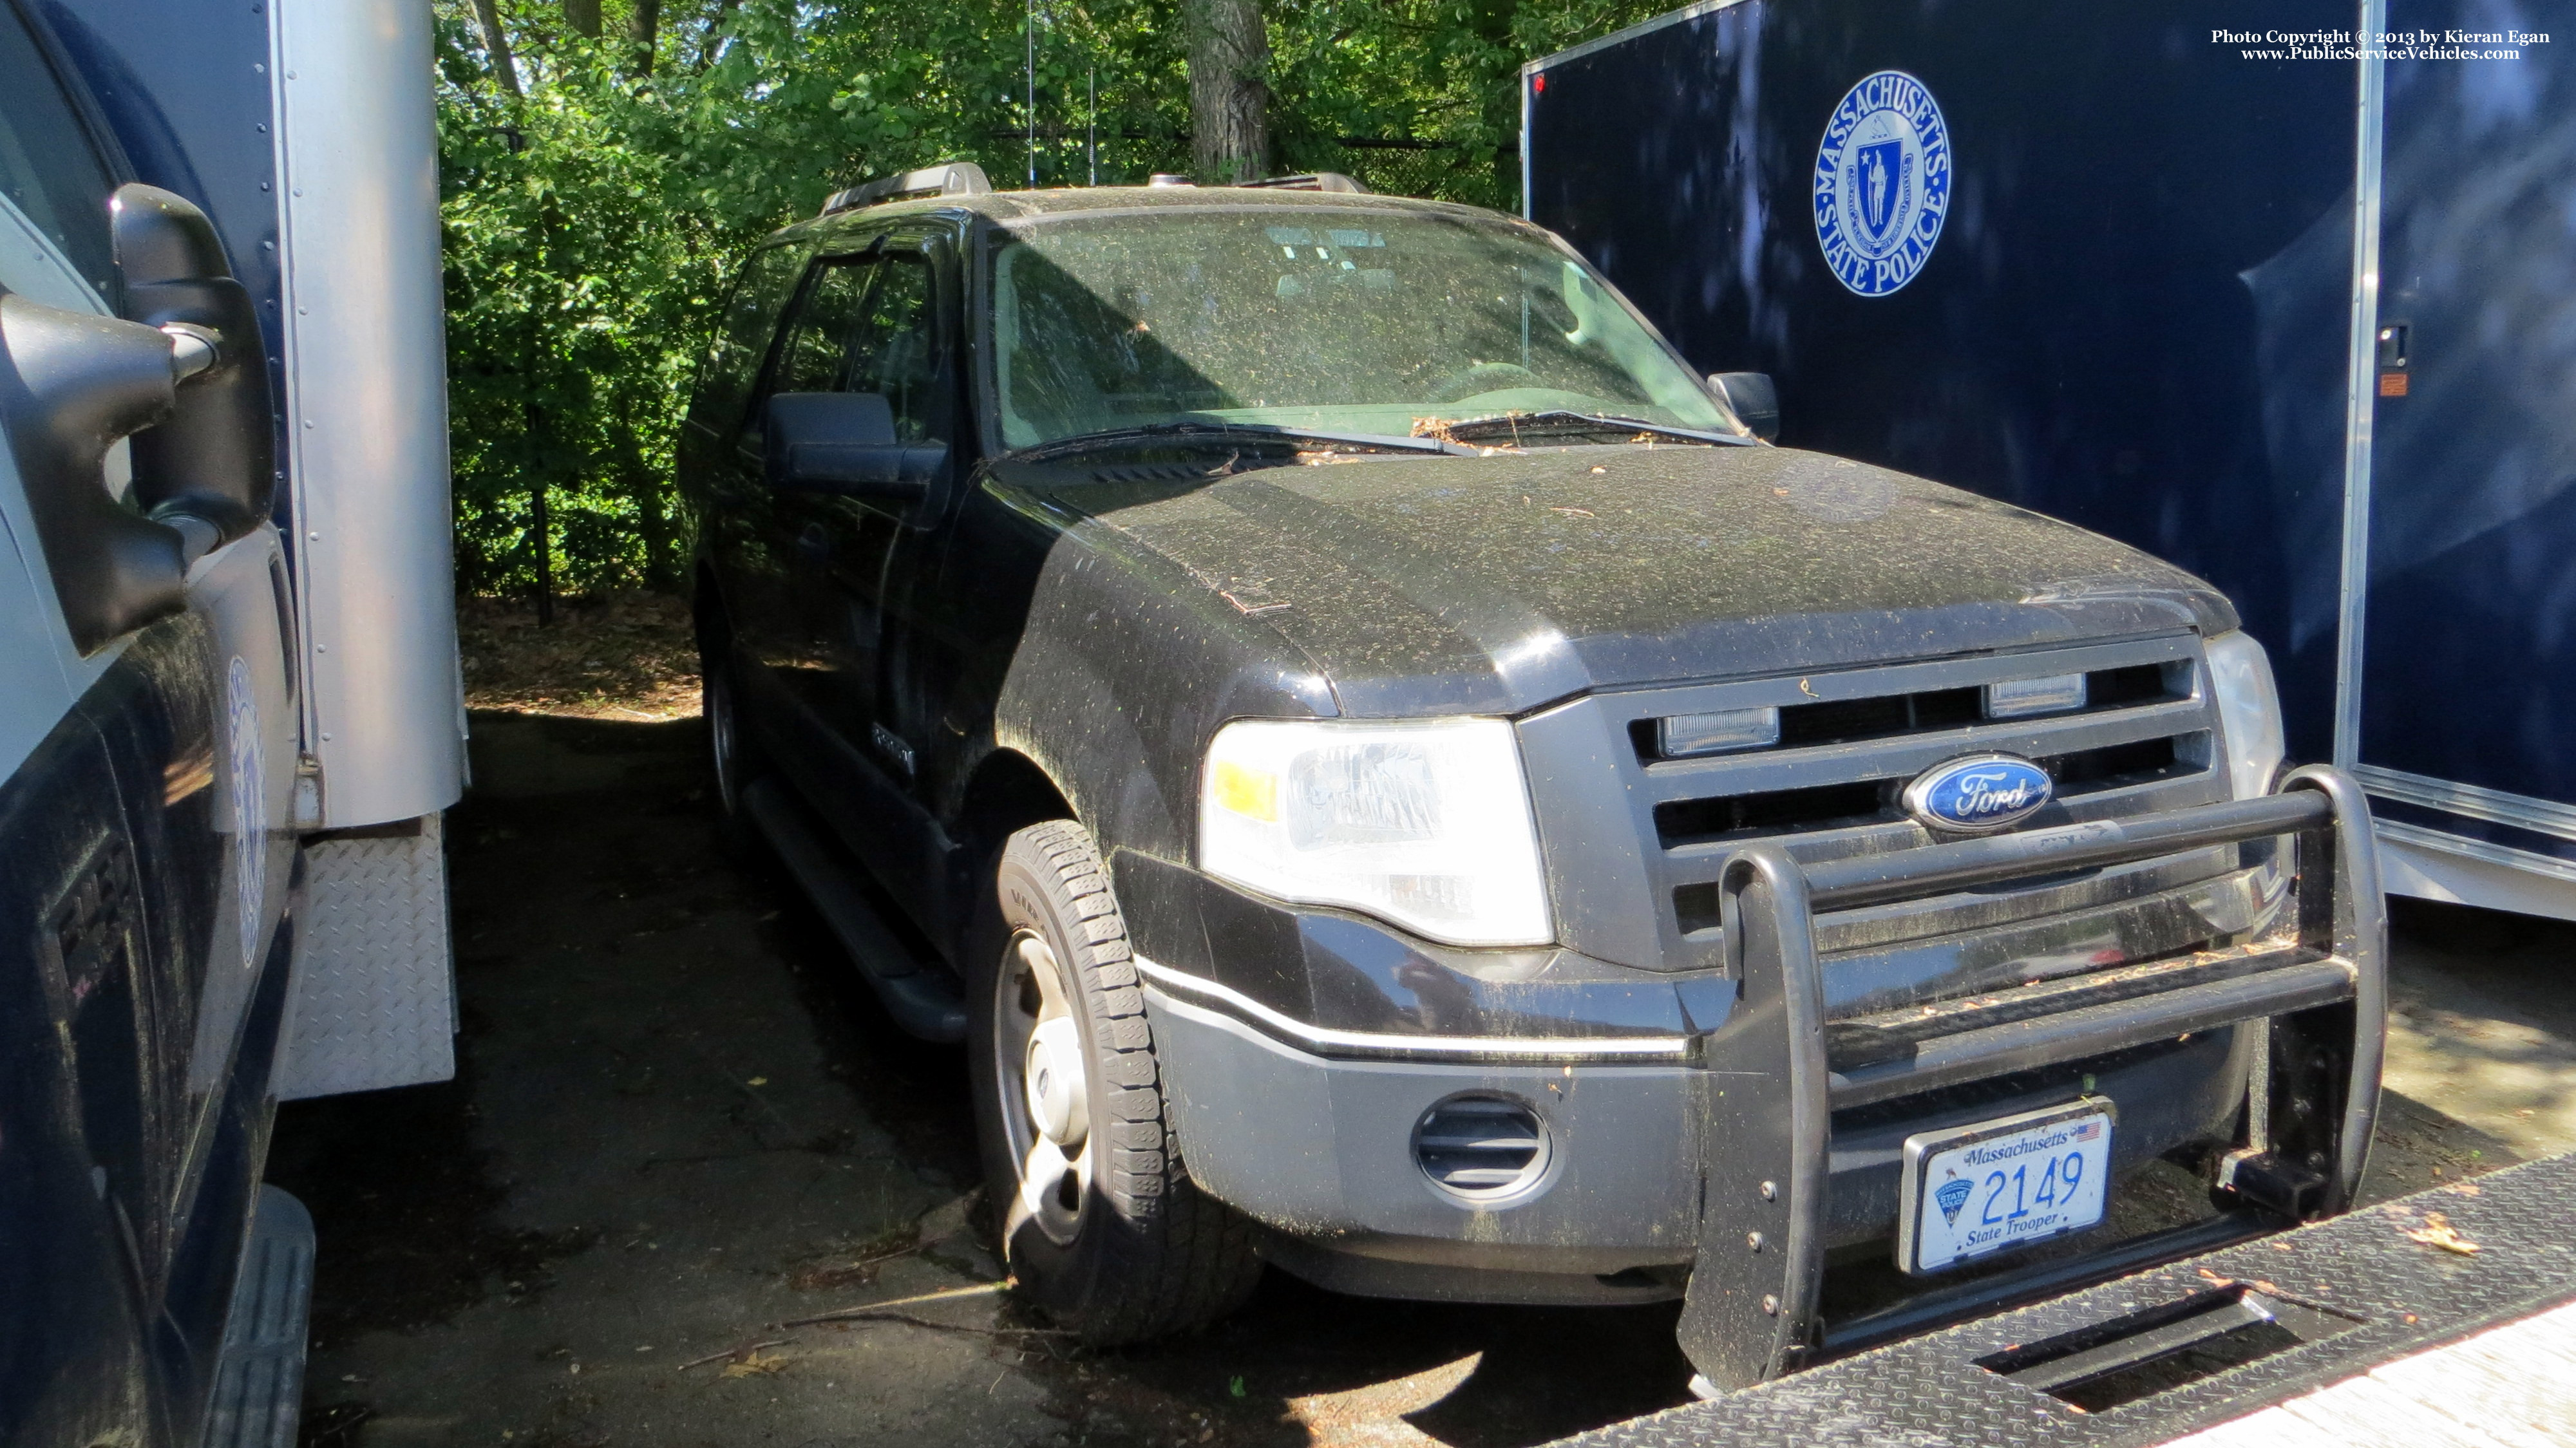 A photo  of Massachusetts State Police
            Cruiser 2149, a 2007-2013 Ford Expedition             taken by Kieran Egan